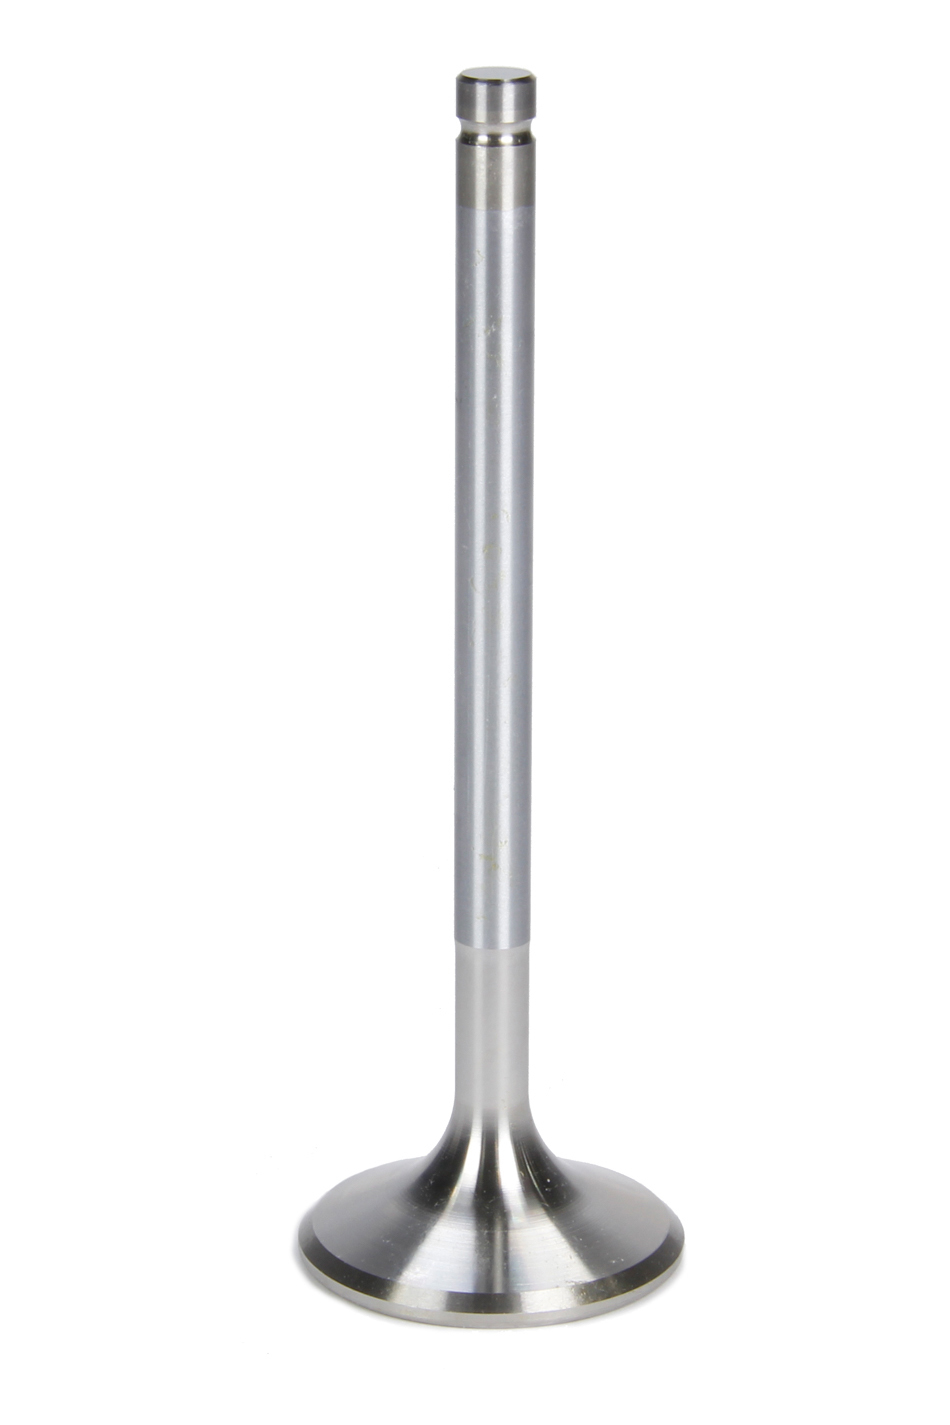 Air Flow Research 7228-1 Exhaust Valve, LS1, 1.600 in Head, 8 mm Stem, 4.907 in Long, Stainless, GM LS-Series, Each